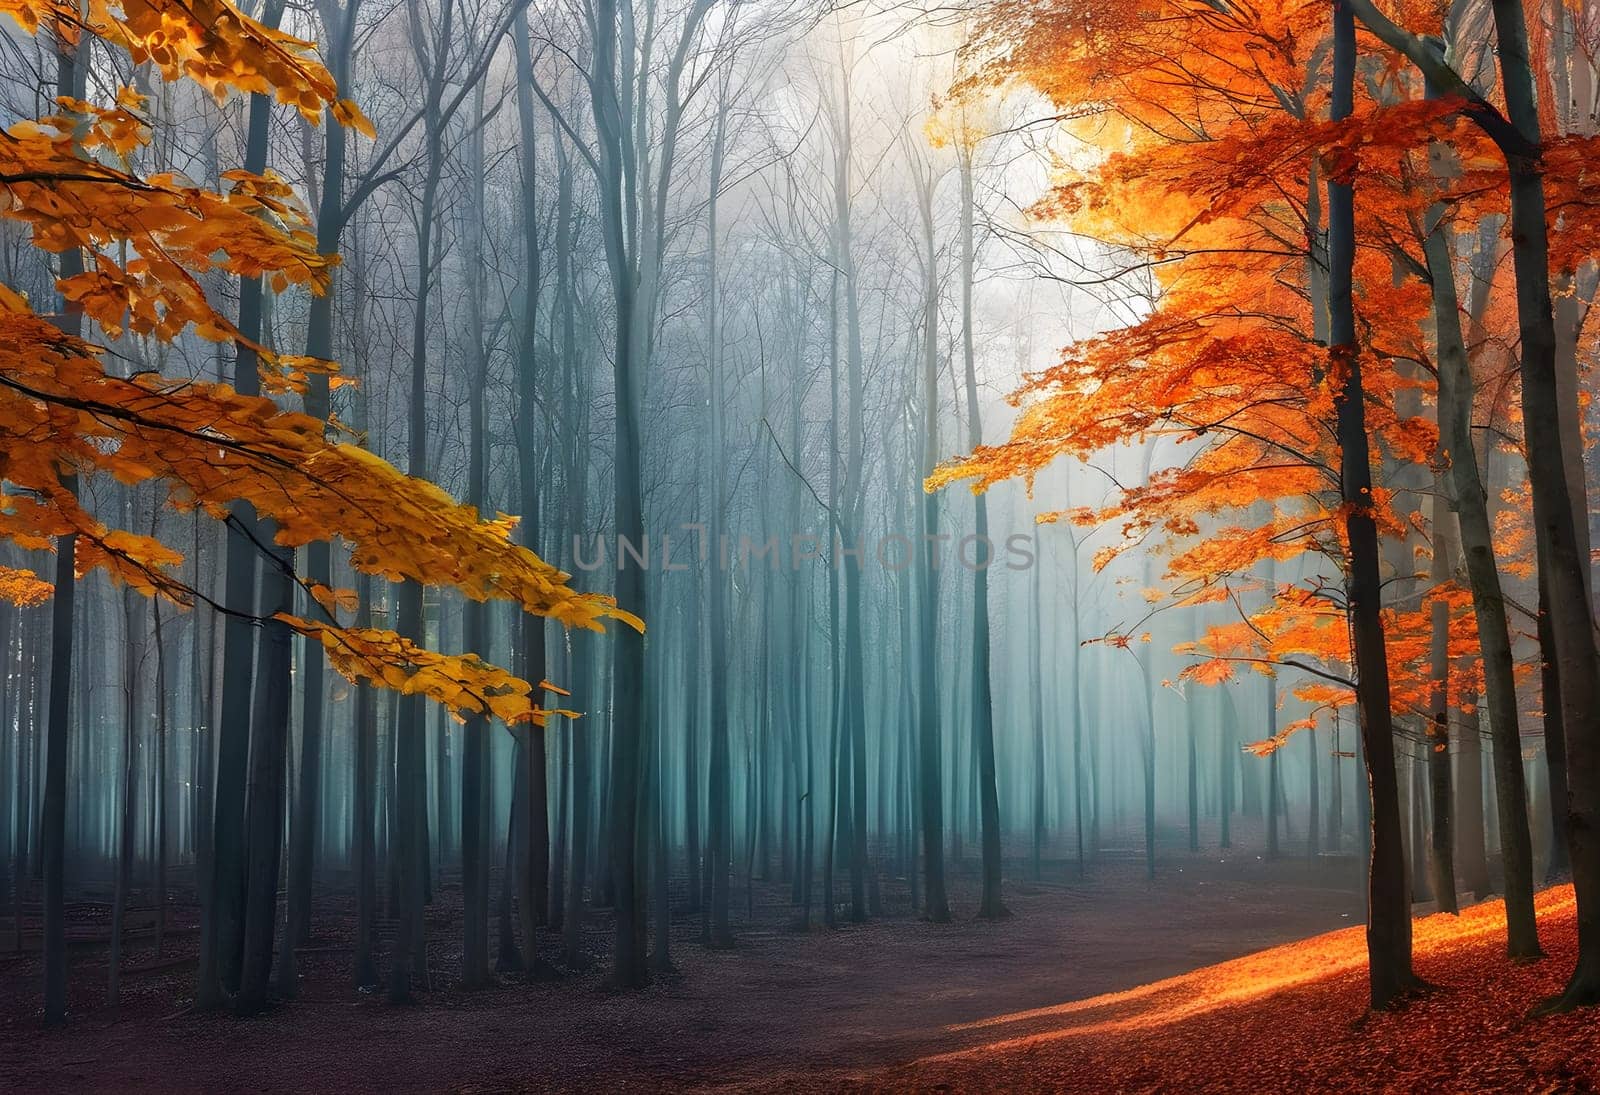 Autumn's Palette: A Journey Through the Forest by Petrichor